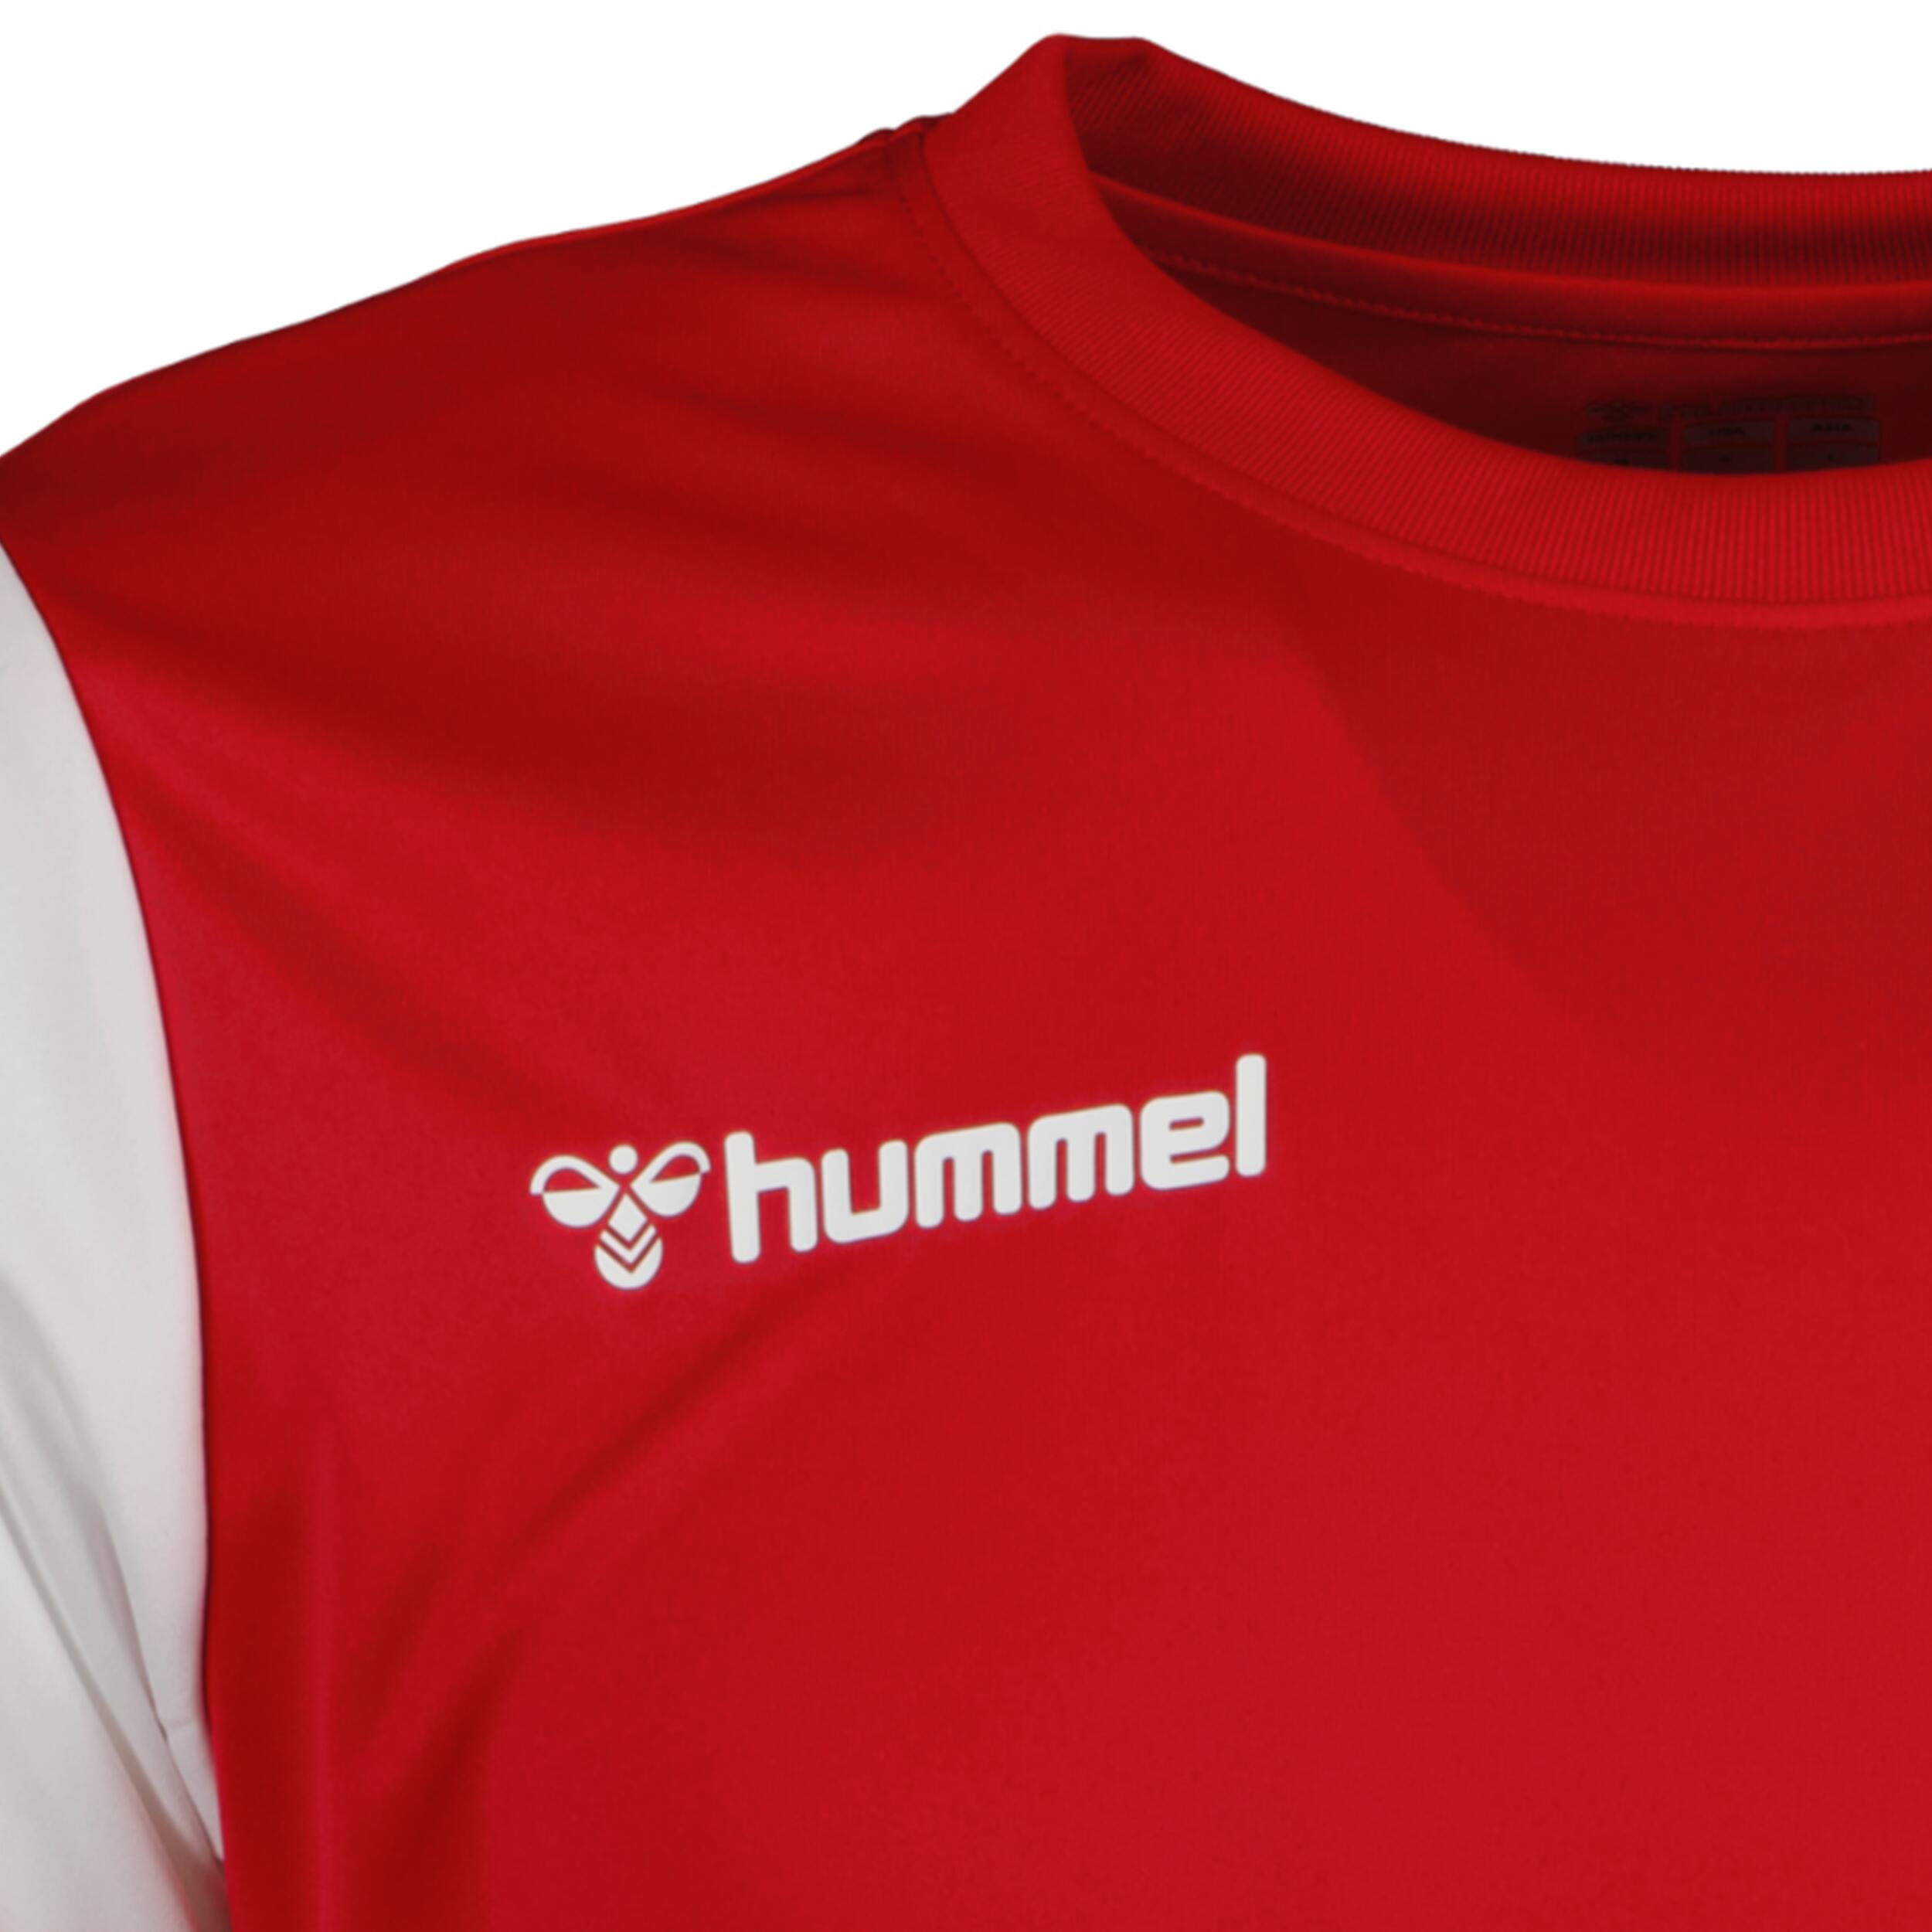 Match jersey for kids, great for football, in red/white 3/3